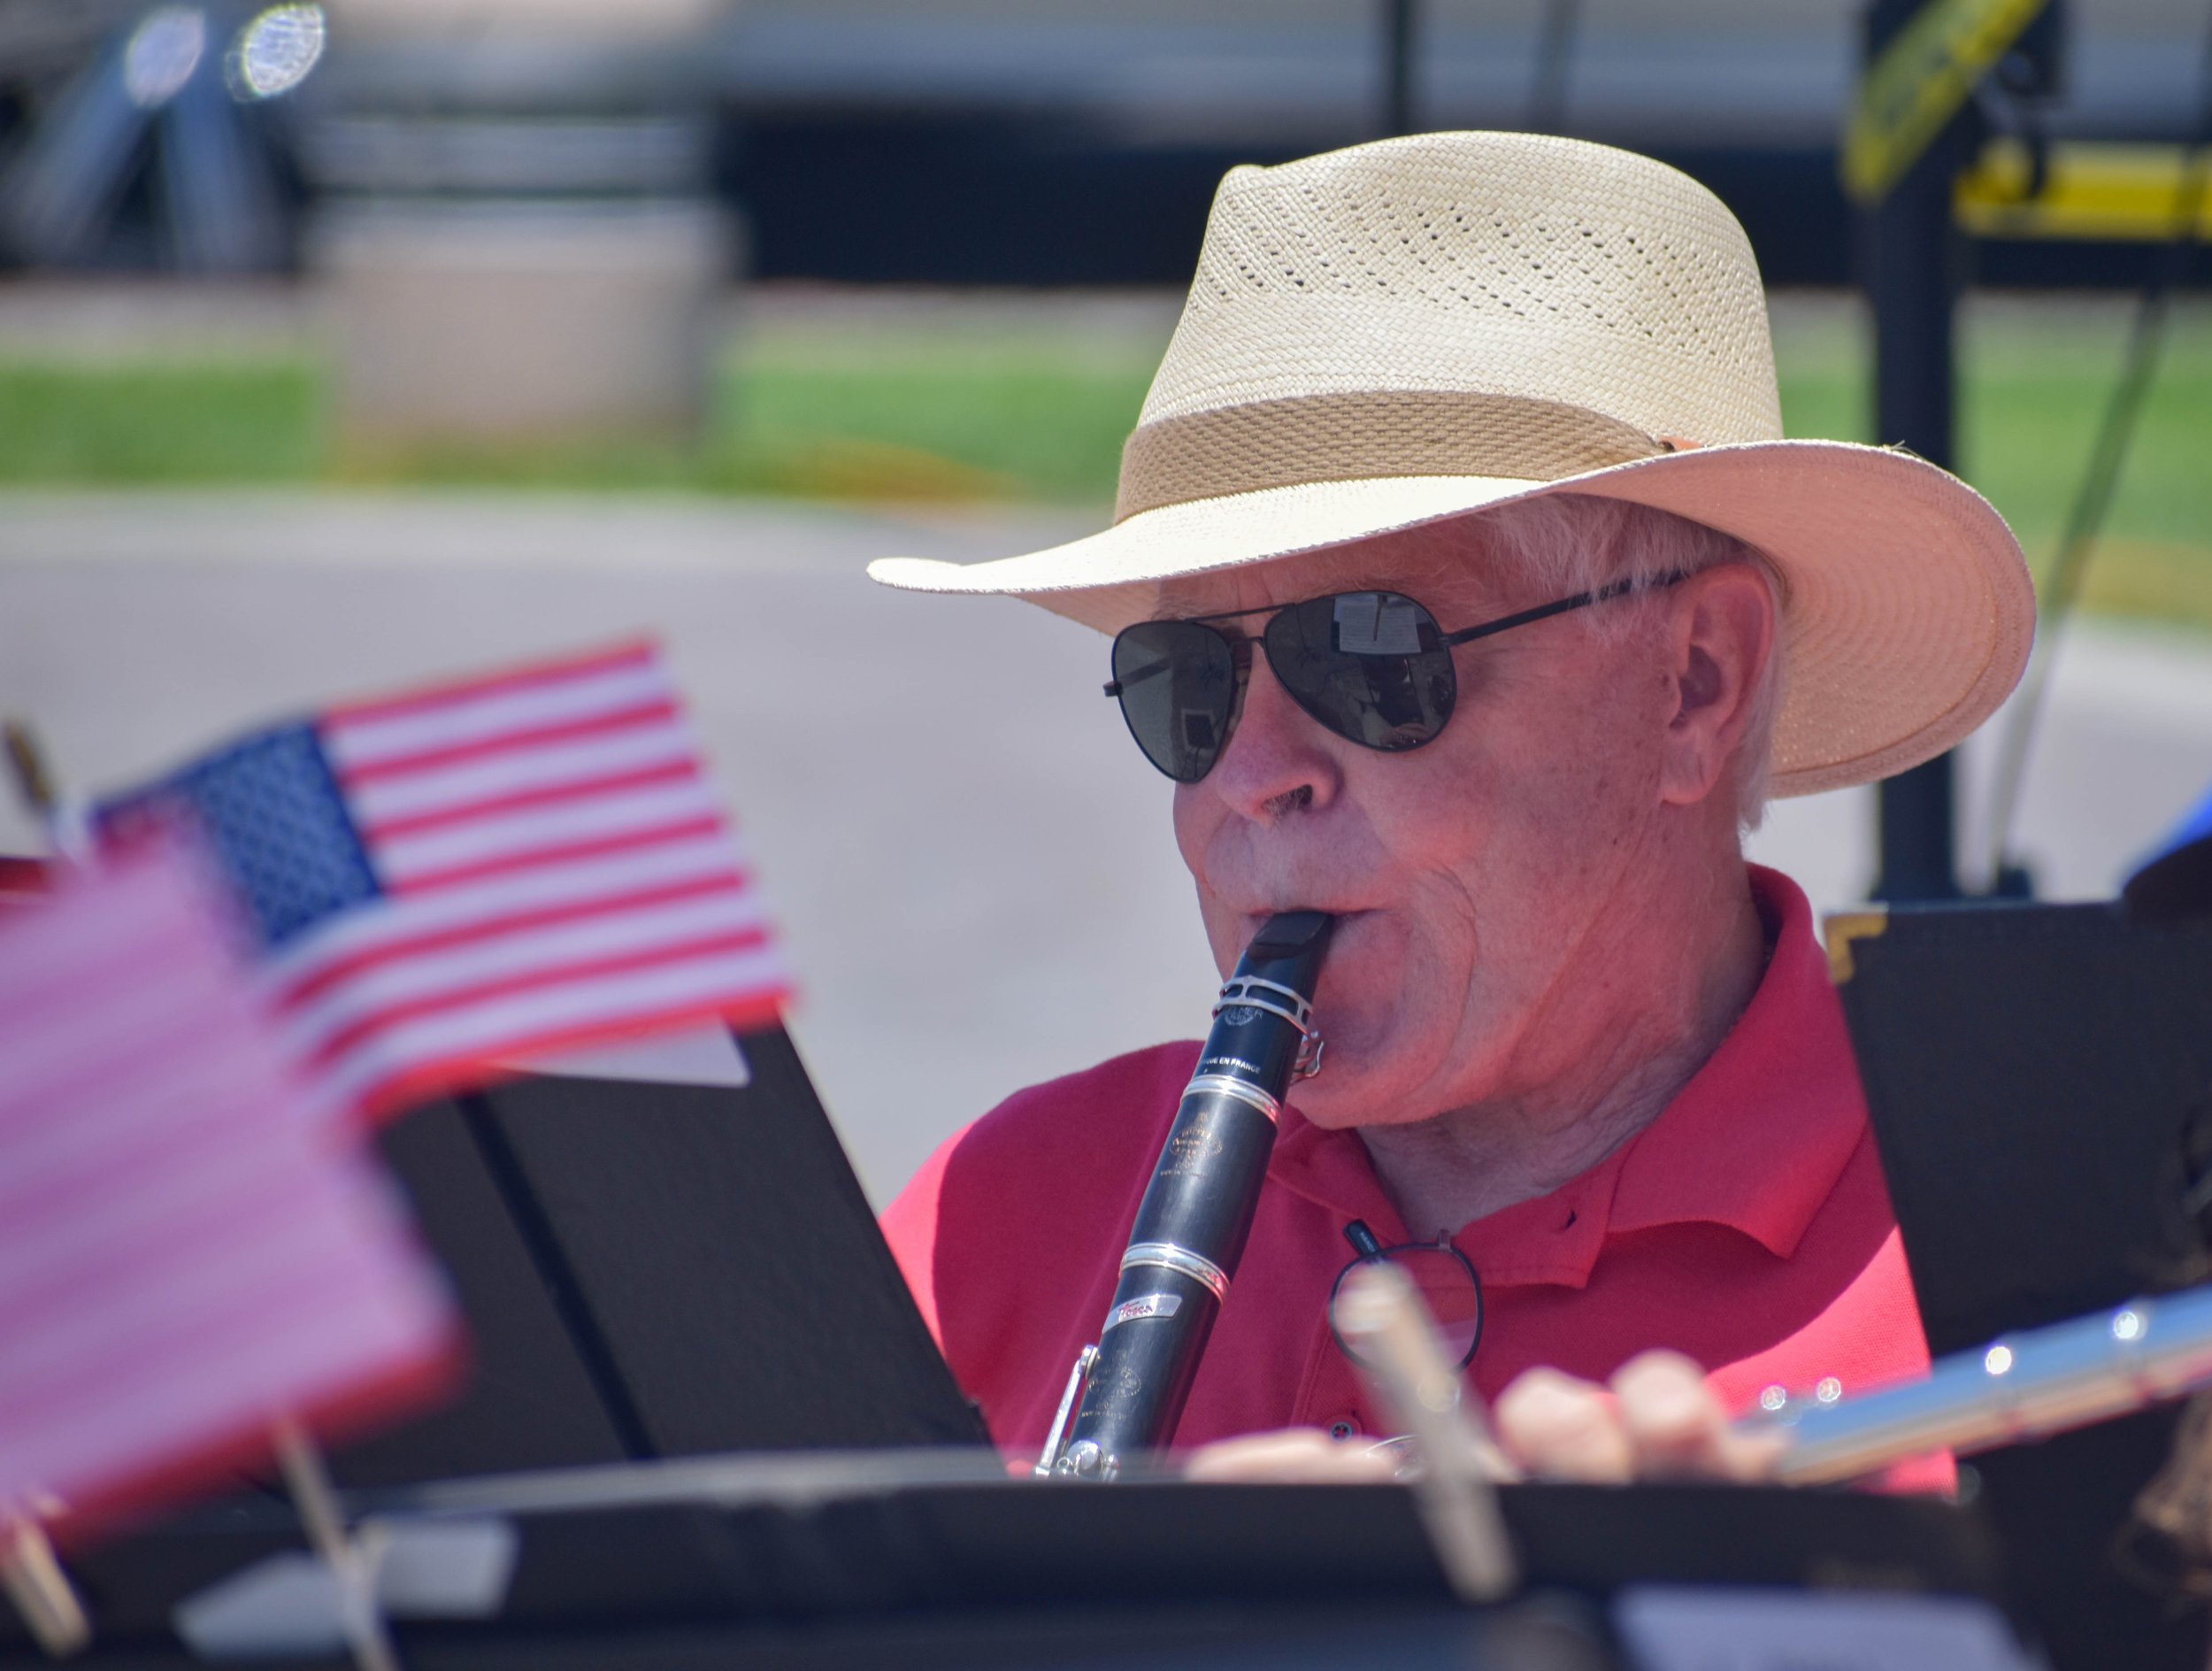 05-30-2022 LCCB Memorial Day Concert by Peyton Webster27-20.jpg